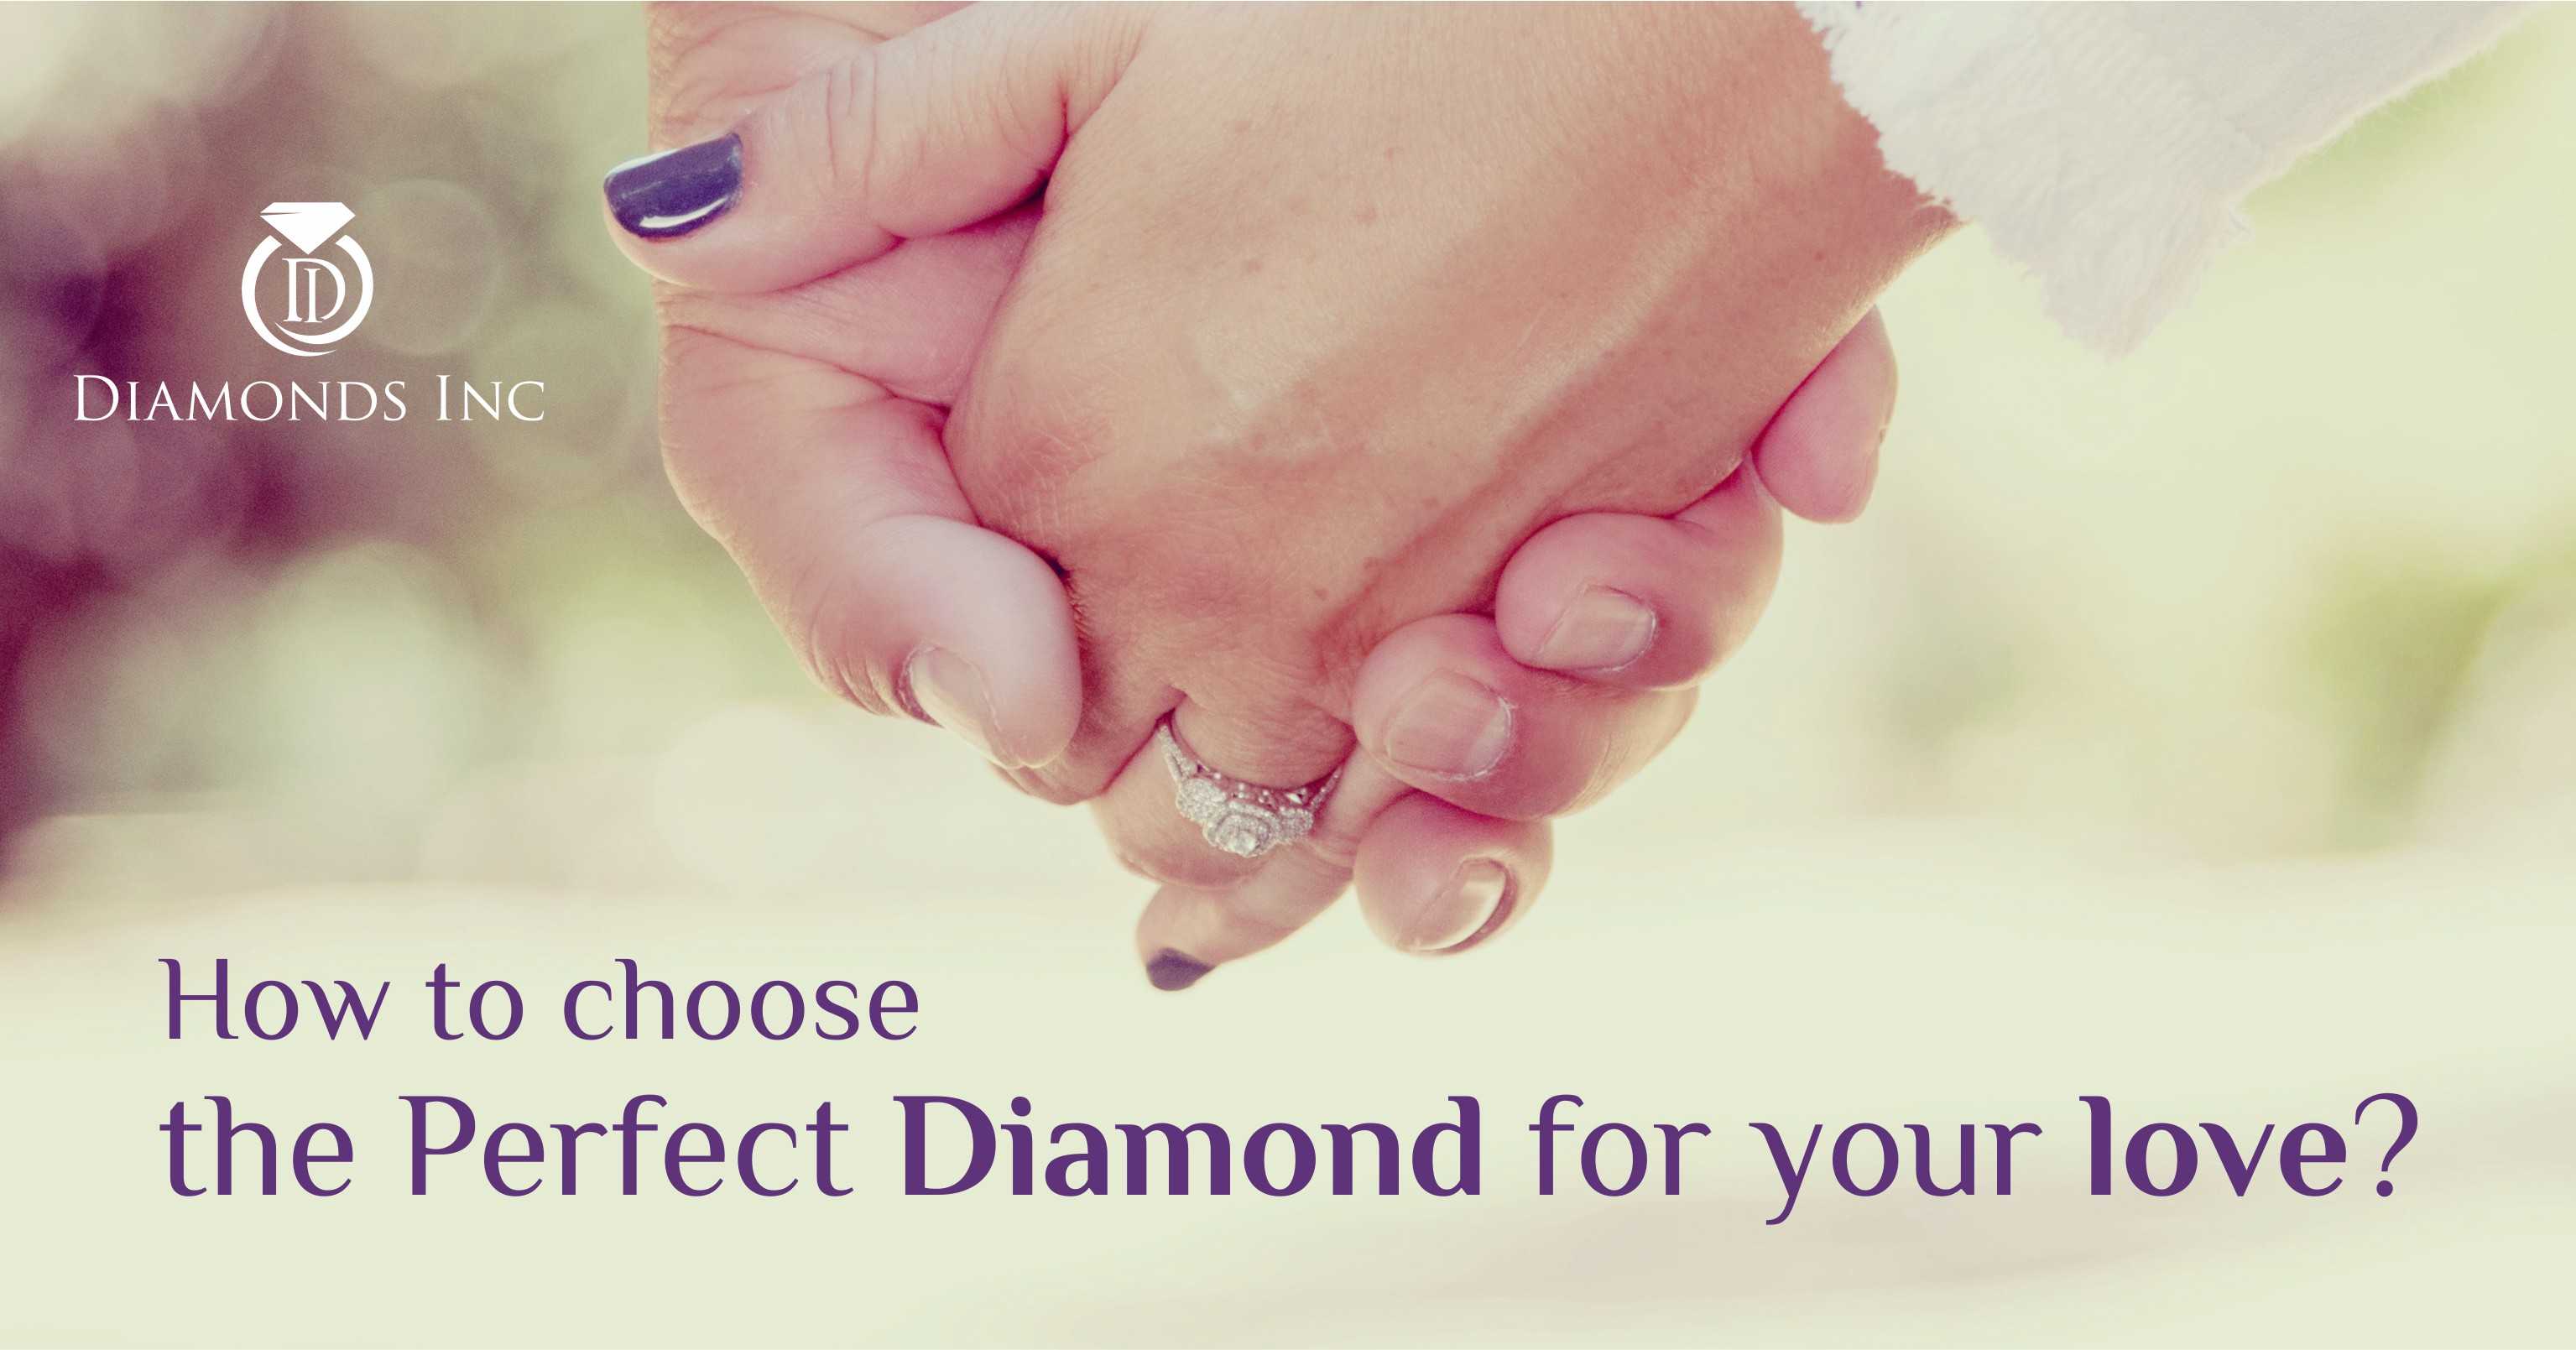 How To Choose The Perfect Diamond For Your Love?